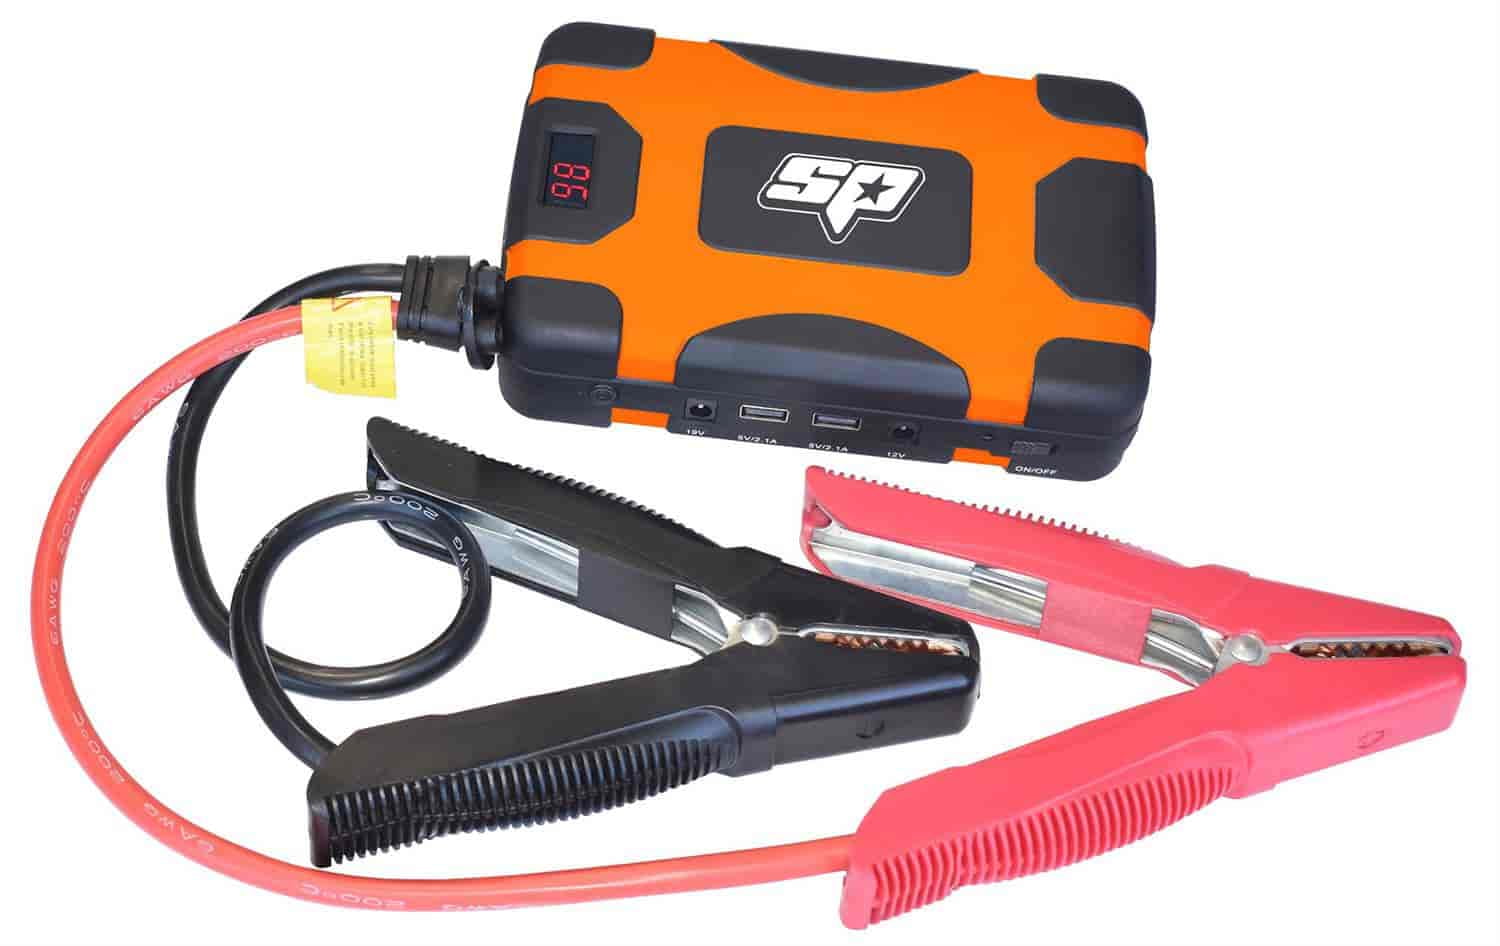 SP Tools SP61073 LI High-Density Power Bank and Battery Jump-Starter Charges Ele 